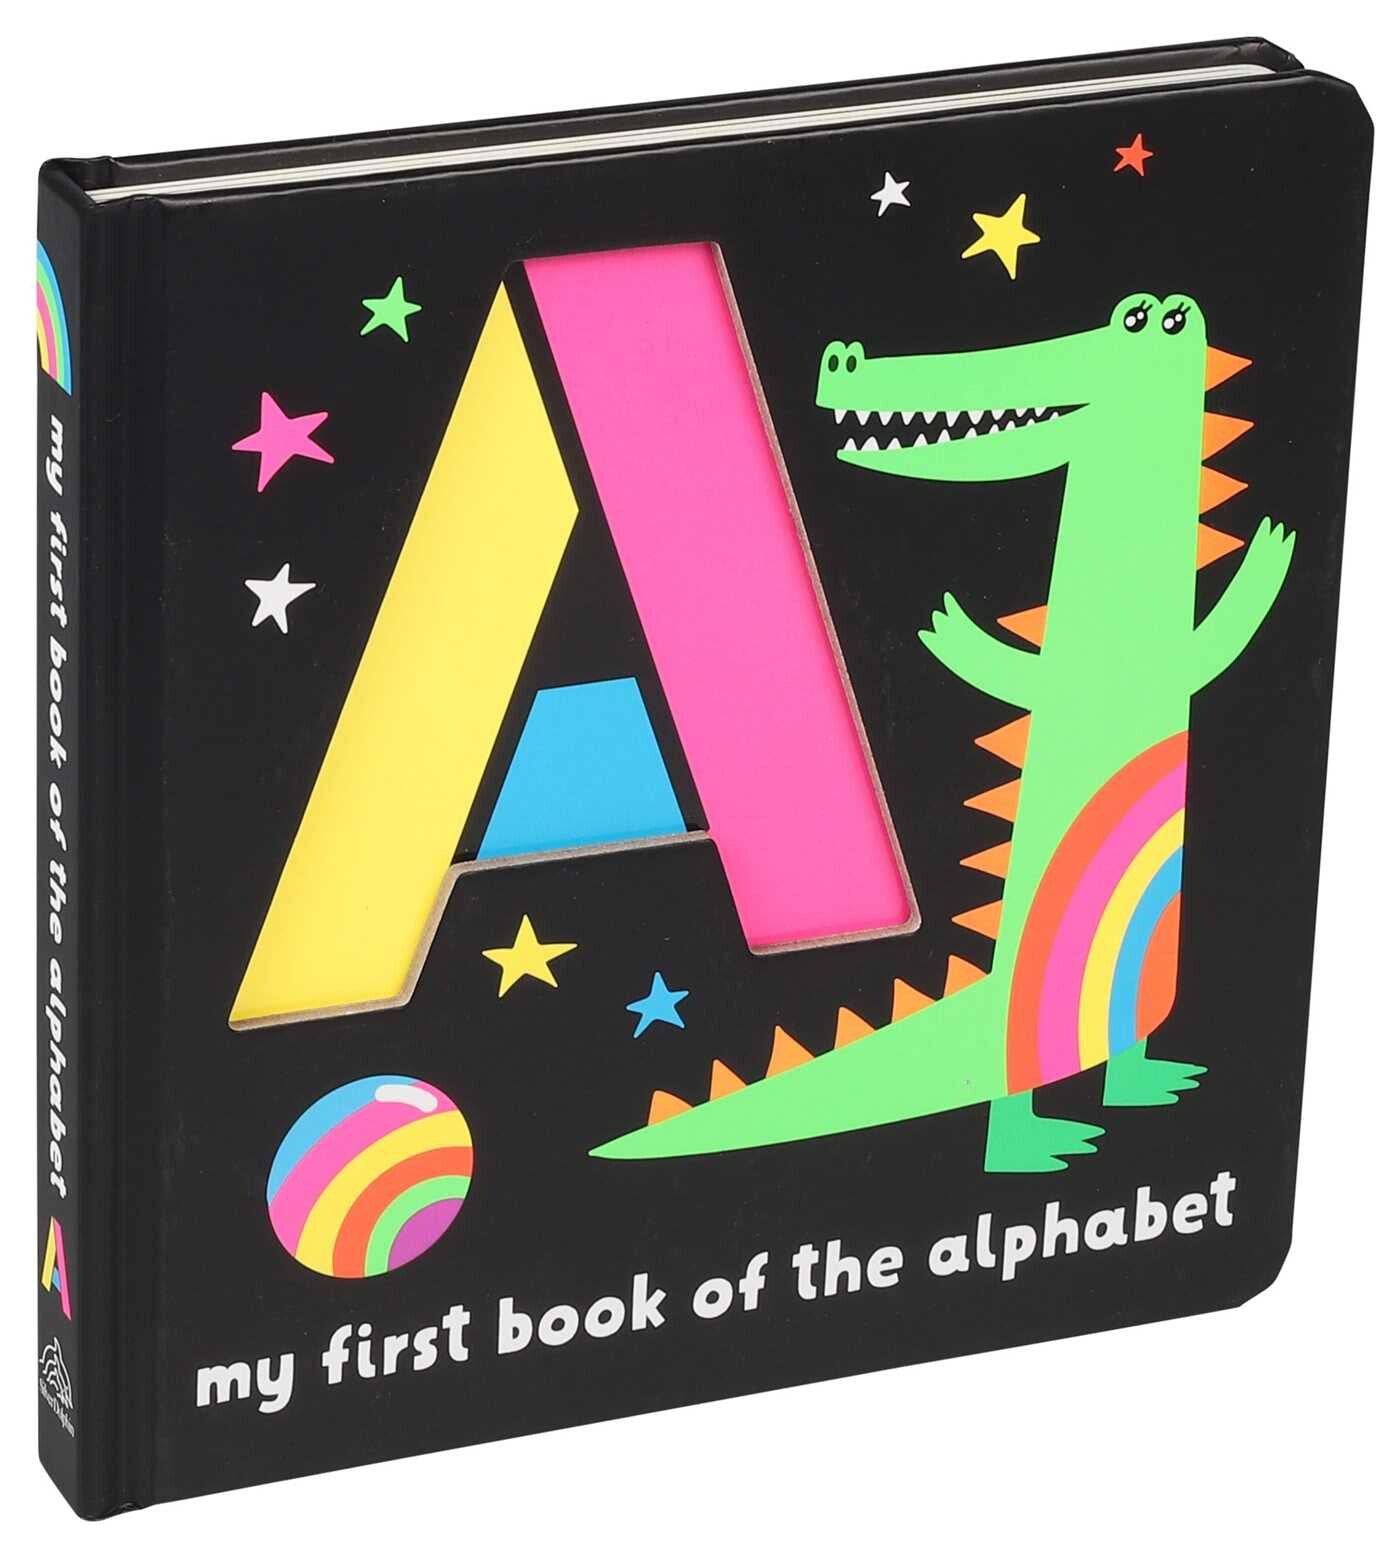 Neon Books: My First Book of the Alphabet - Twinkle Twinkle Little One